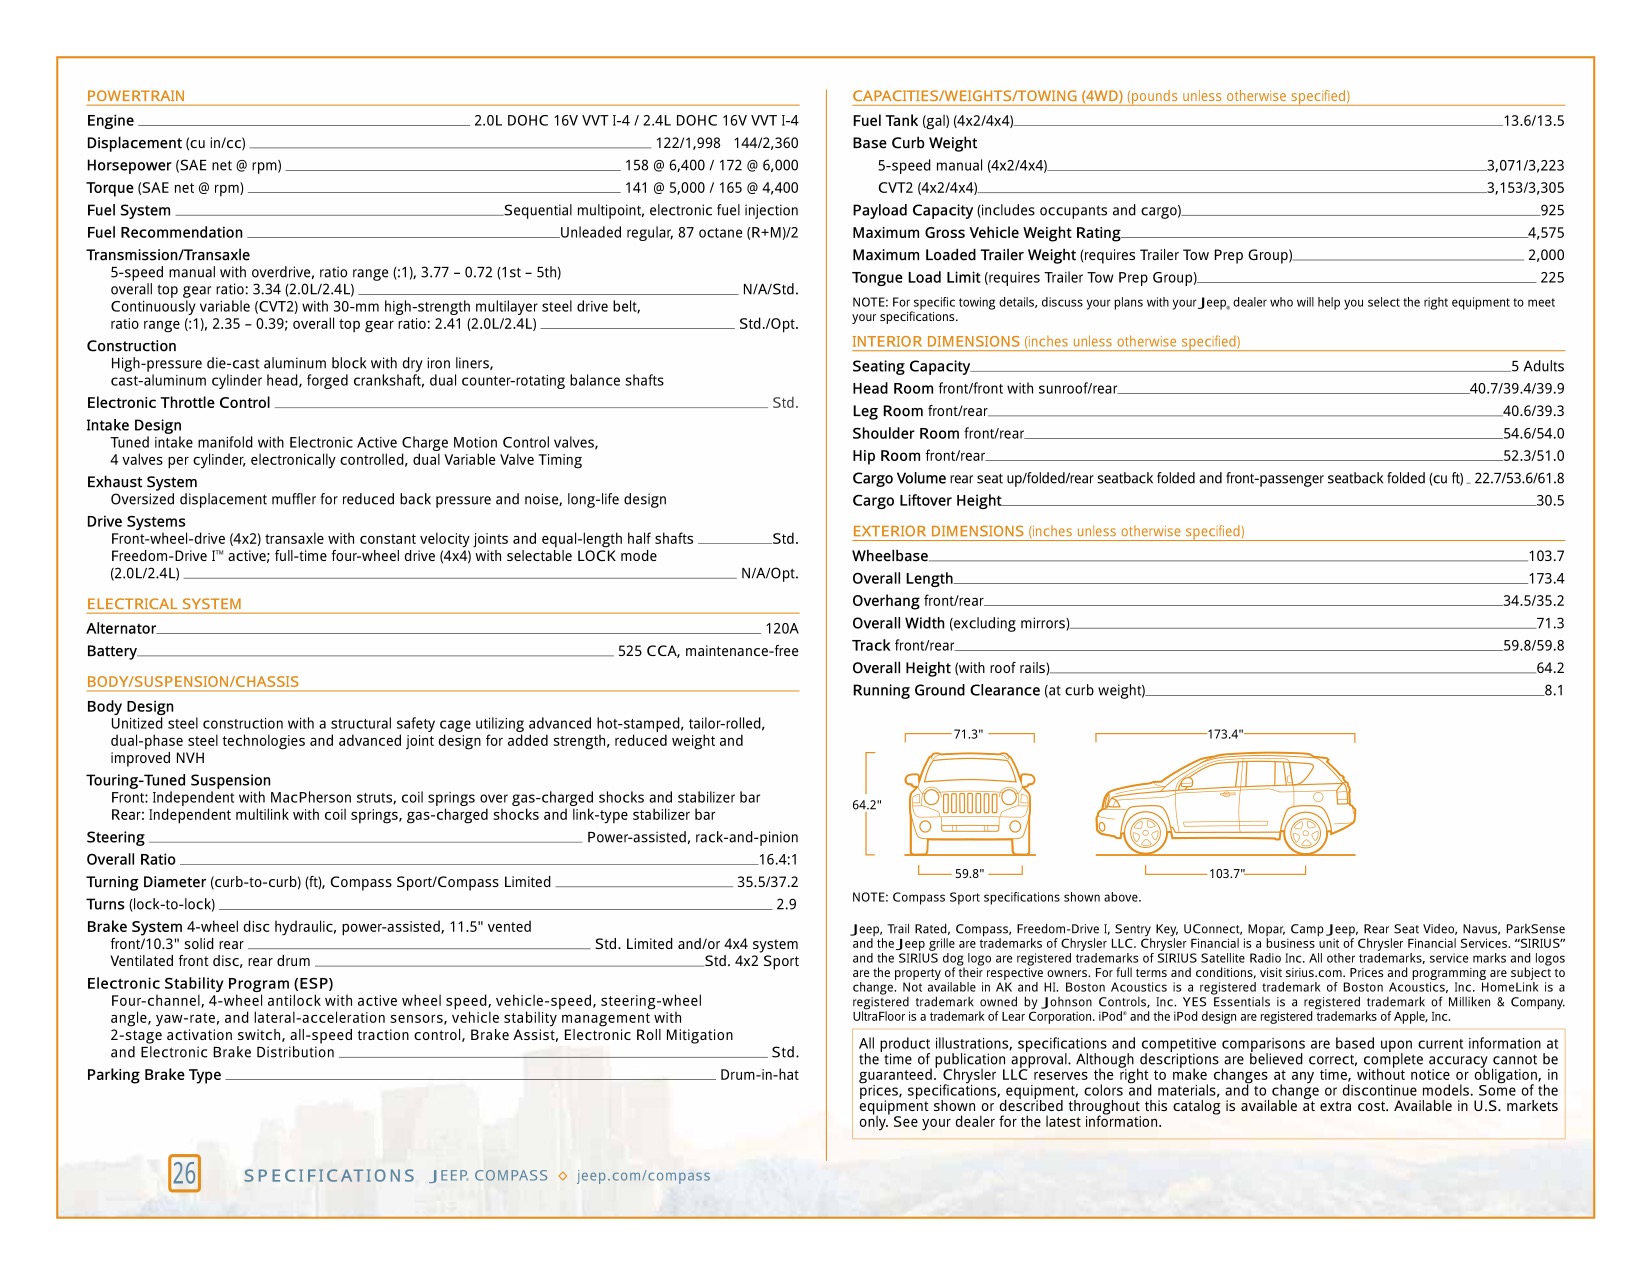 2008 Jeep Compass Brochure Page 2